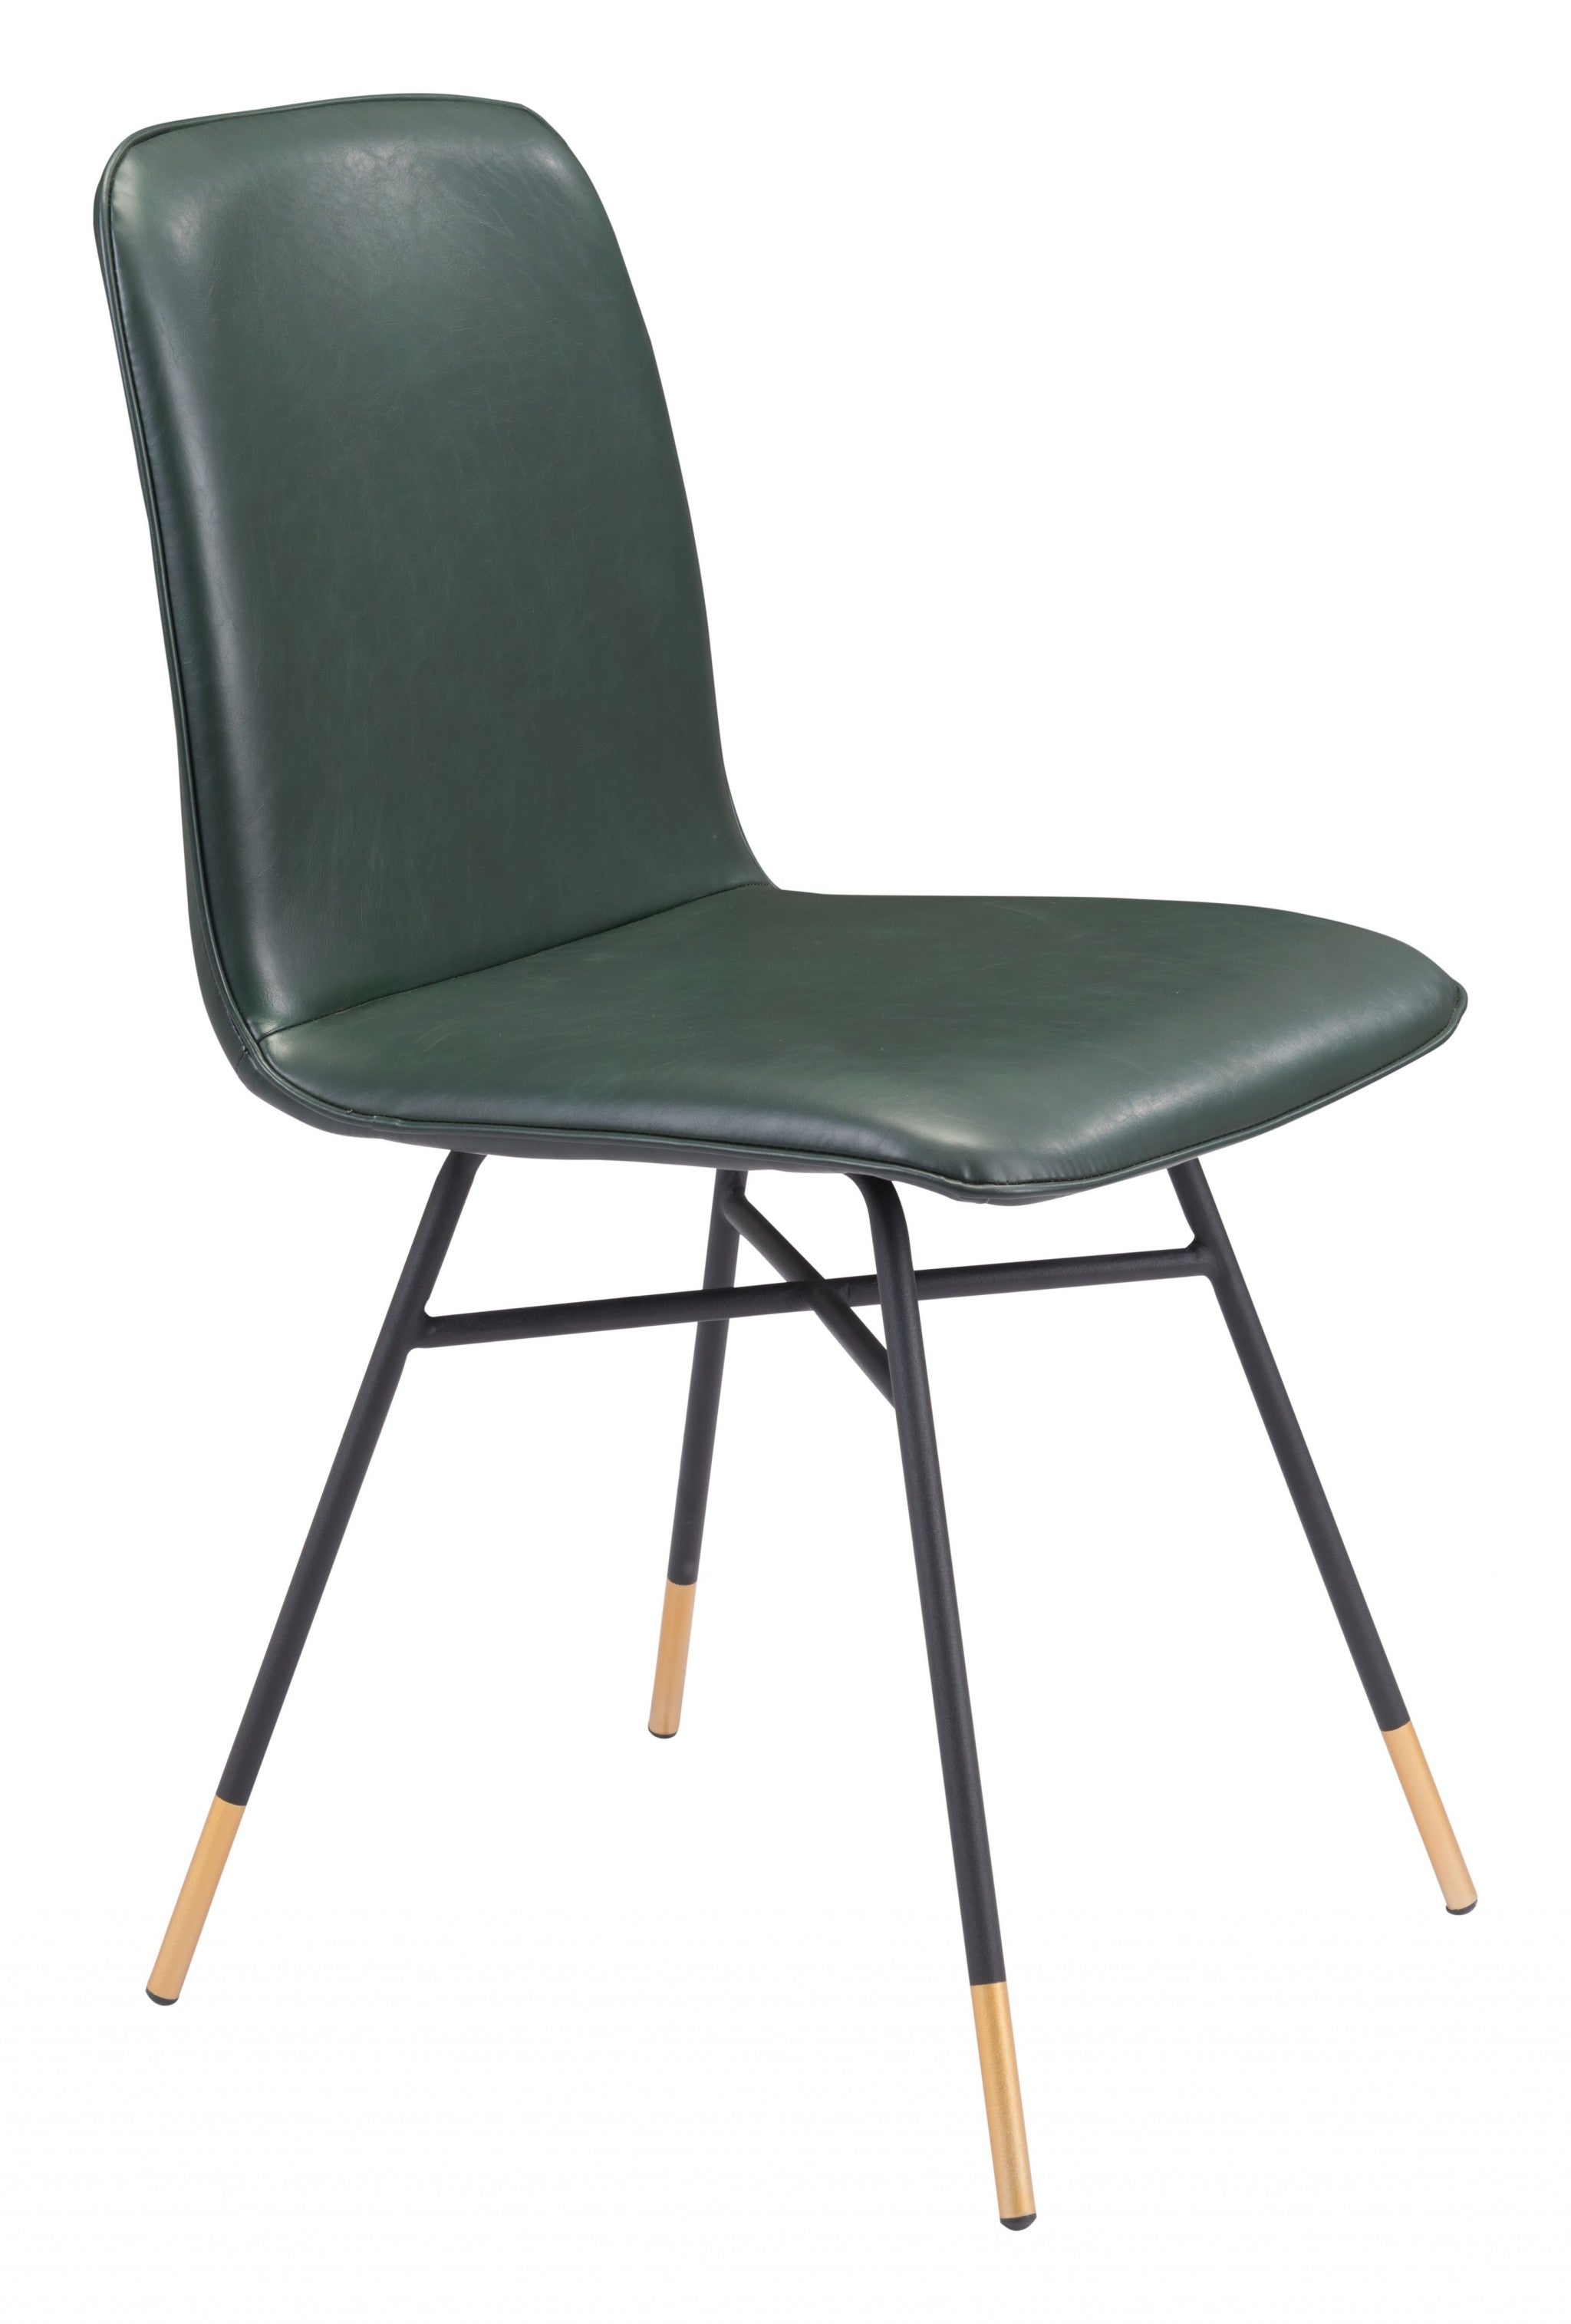 Set of Two Green and Black and Gold Upholstered Faux Leather Dining Side Chairs